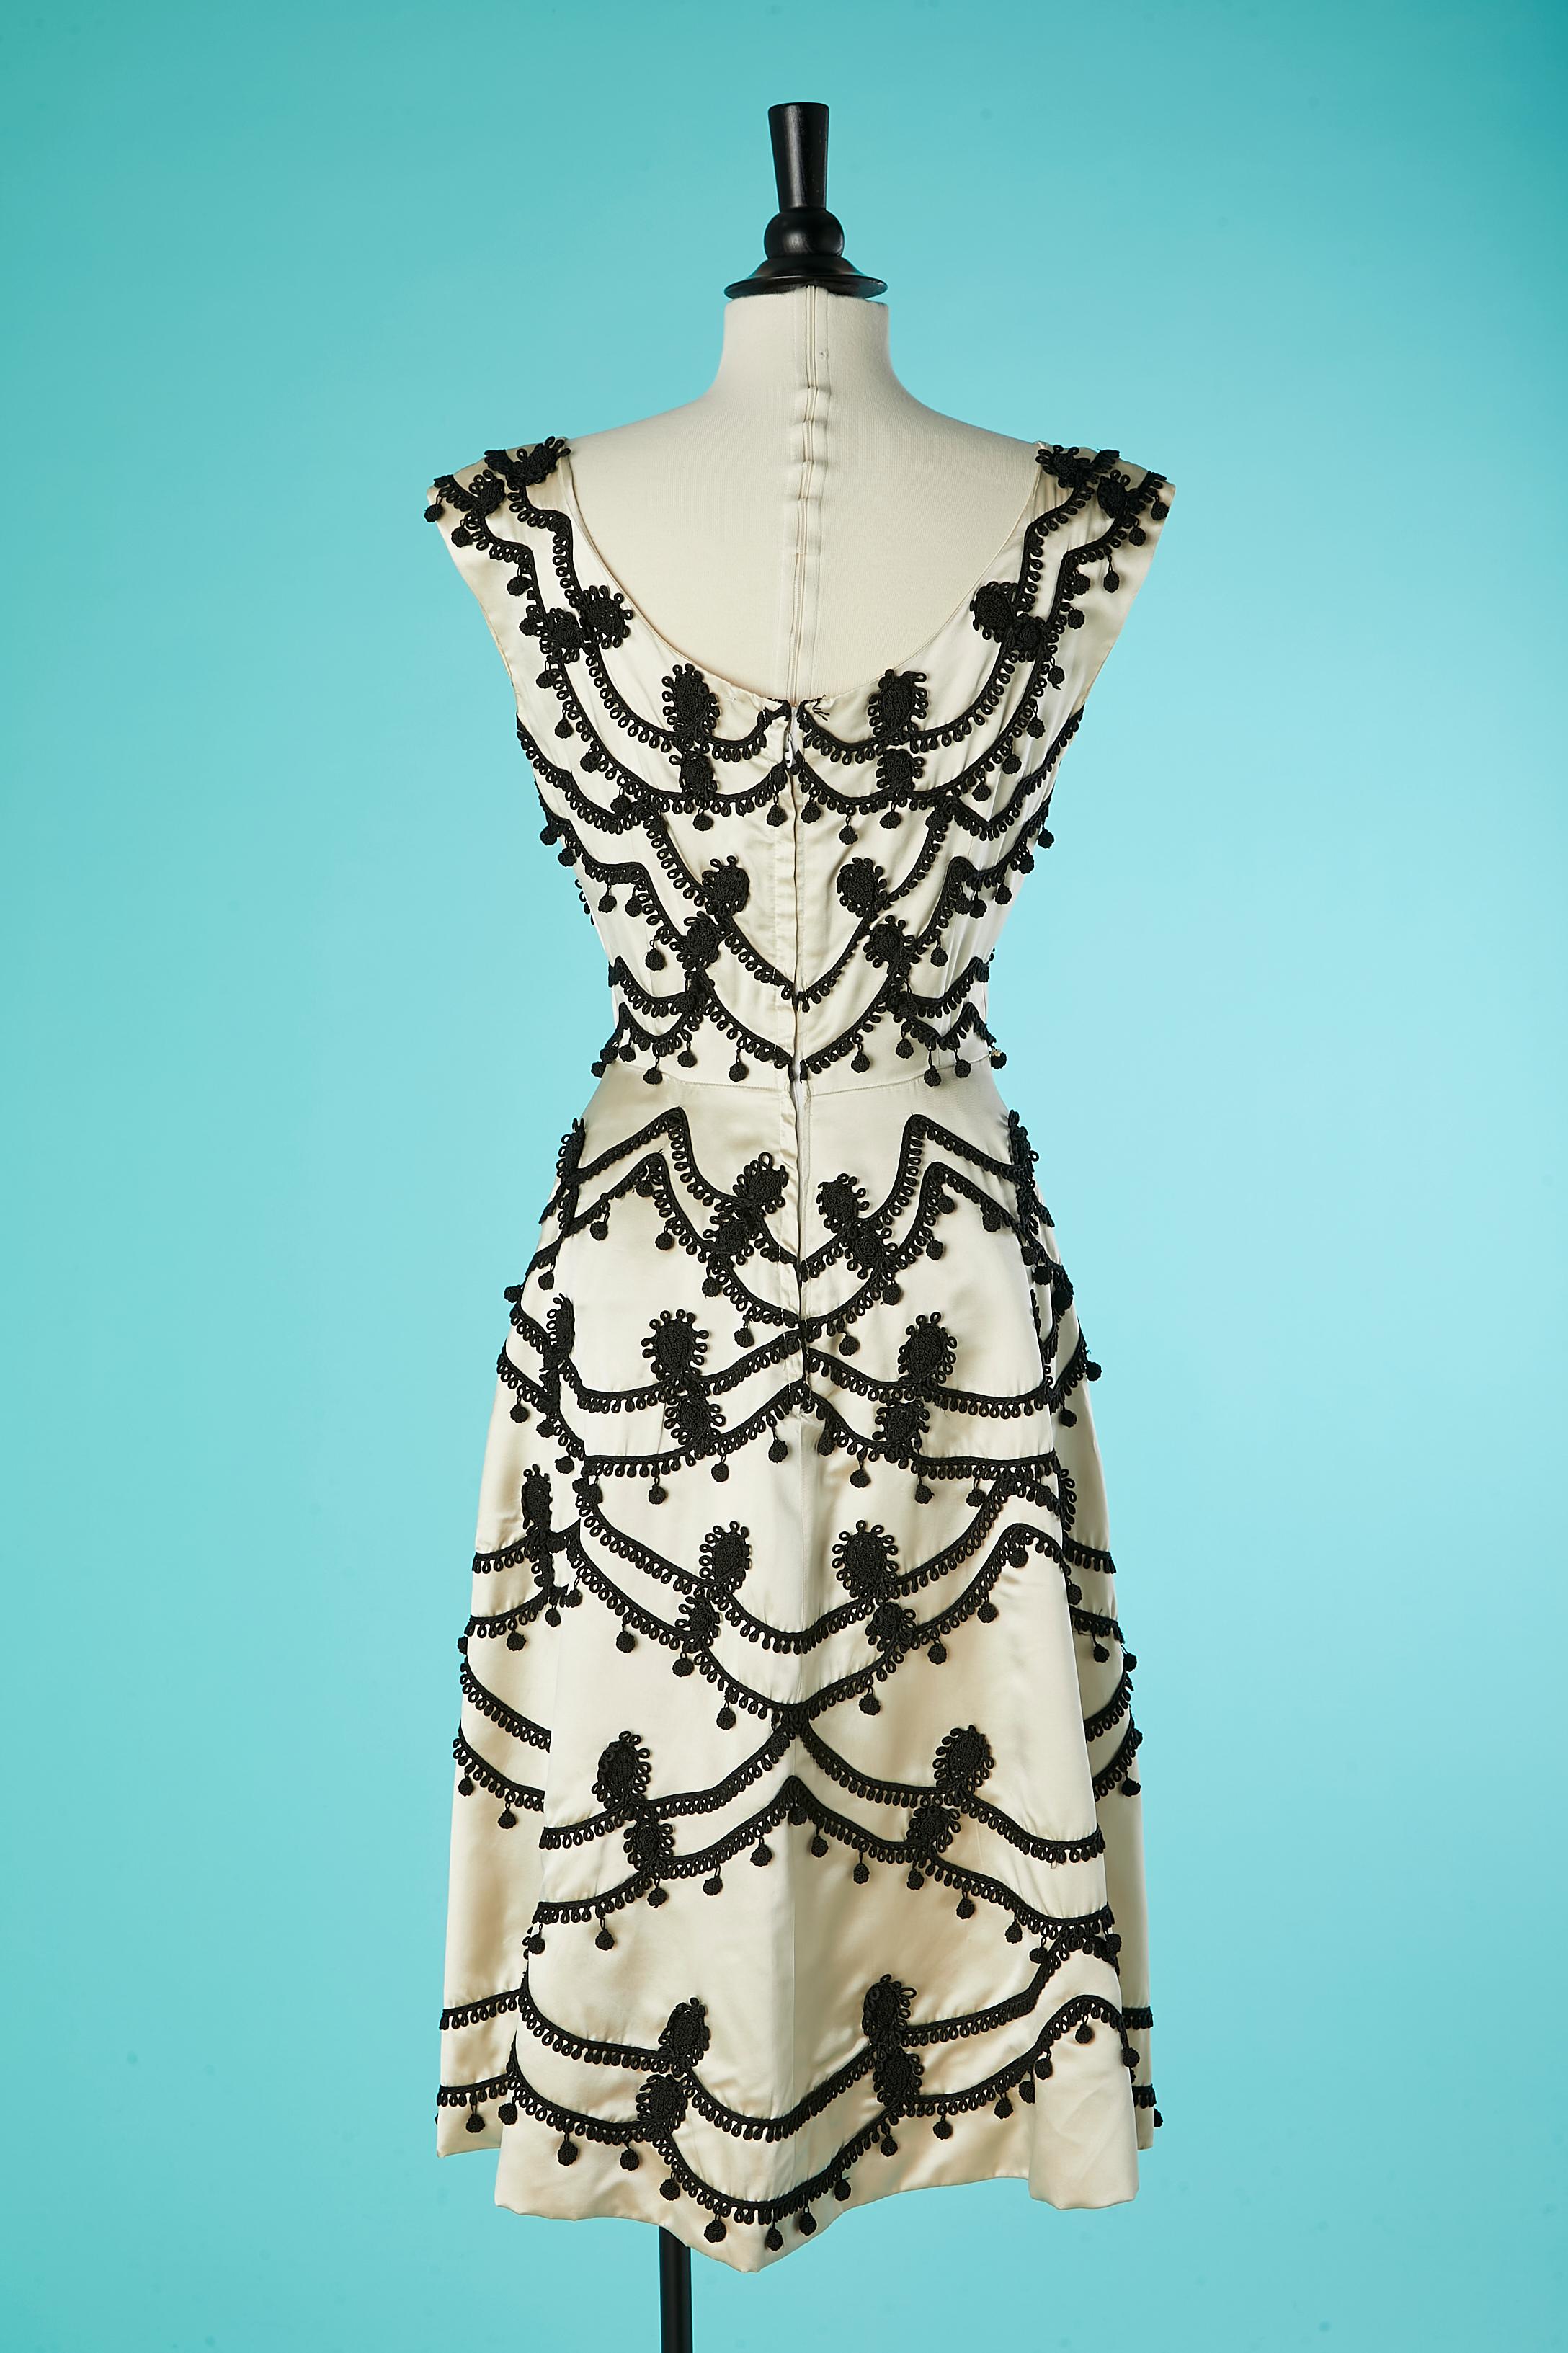 Ivory satin cocktail dress with black passementerie embellishment Circa 1950 For Sale 1